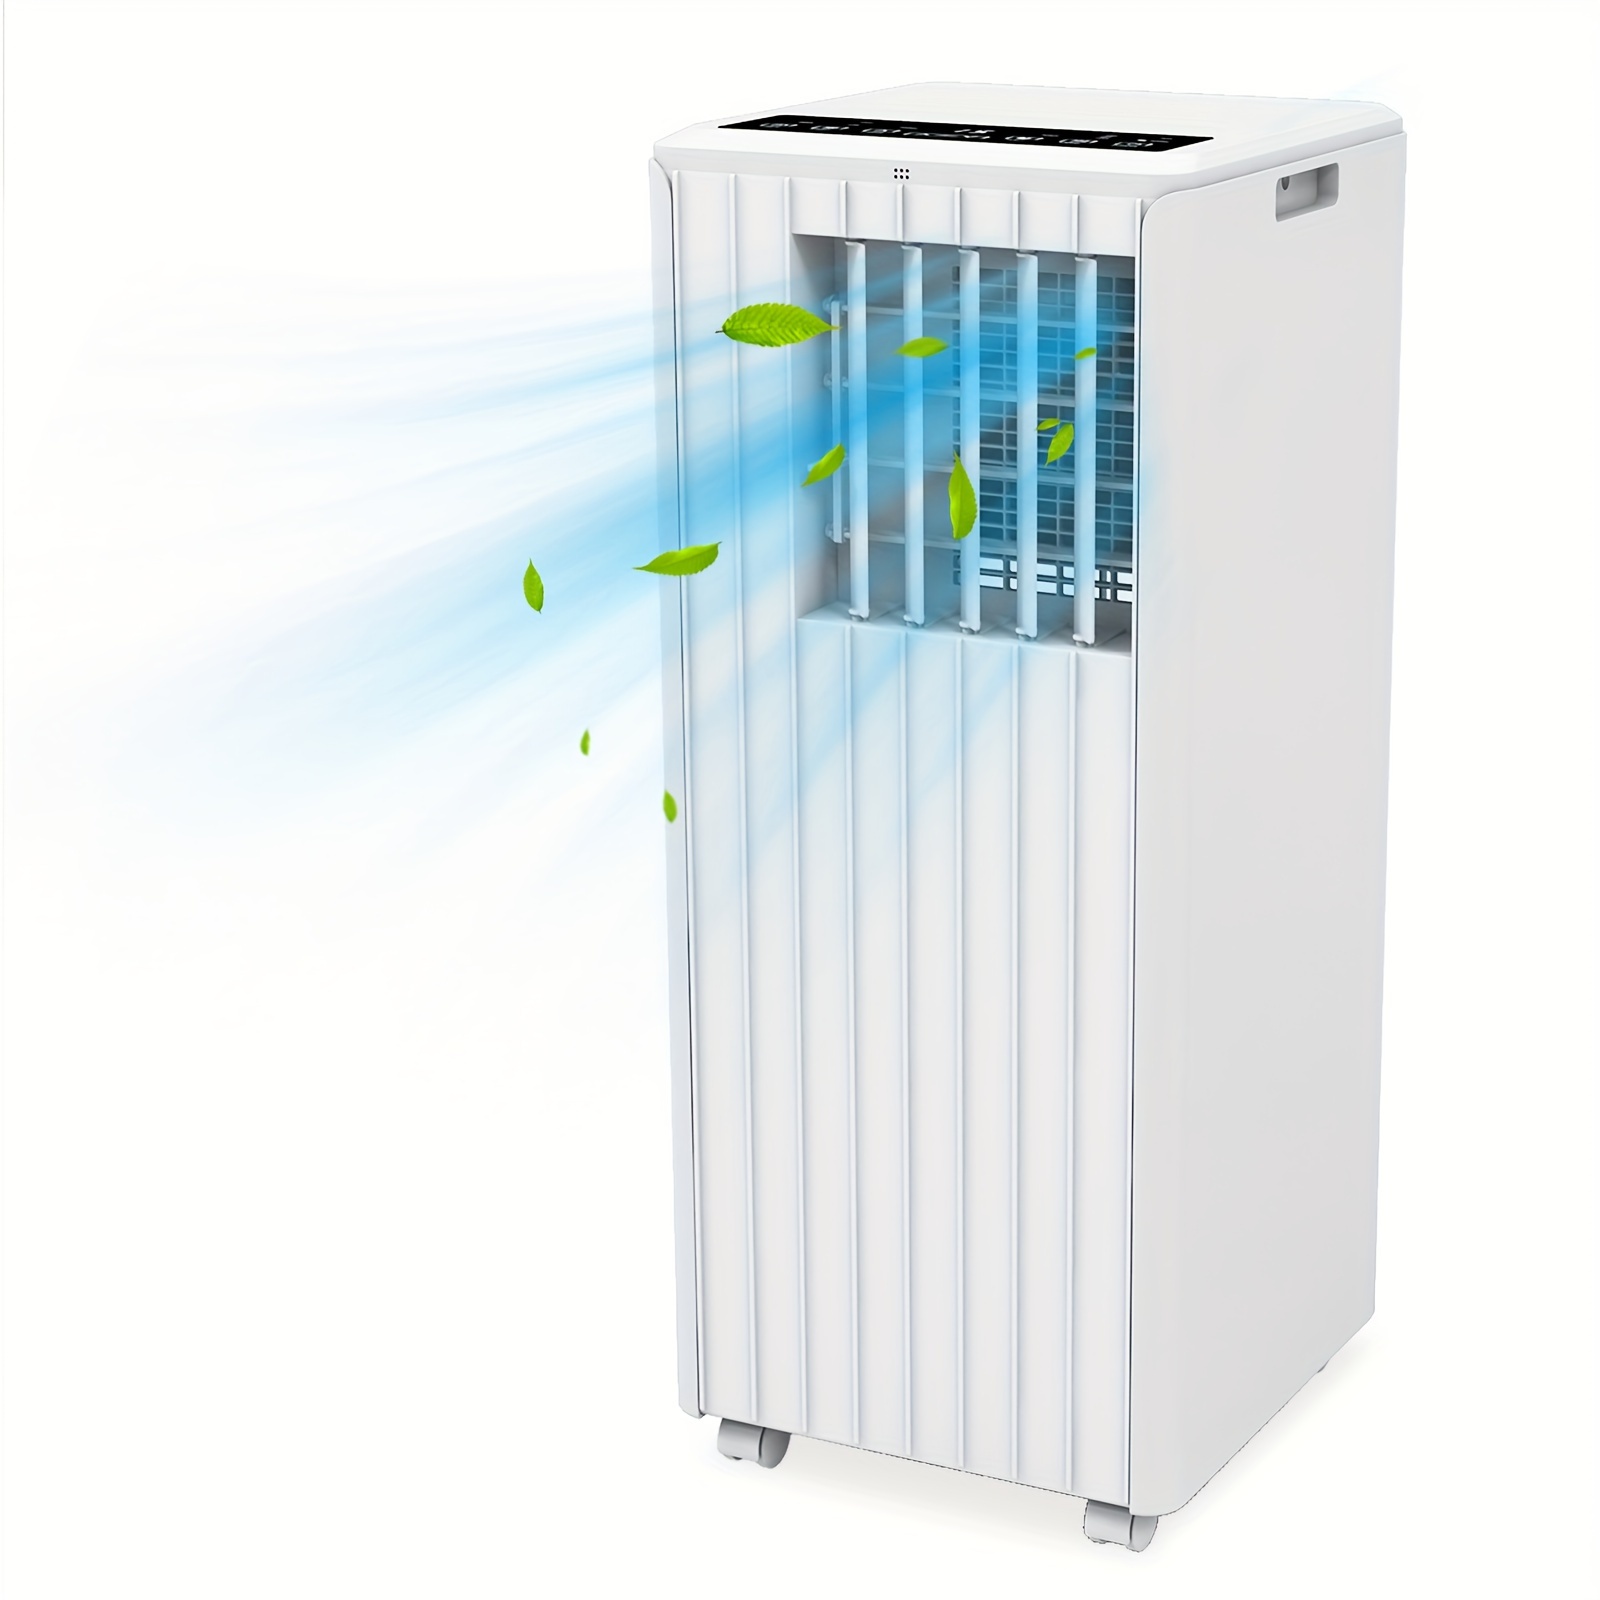 * With 8,000 BTU, Equipped With A Remote Control (suitable For Rooms Up To 350 Square Feet), Three-in-one Air Conditioner, Digi